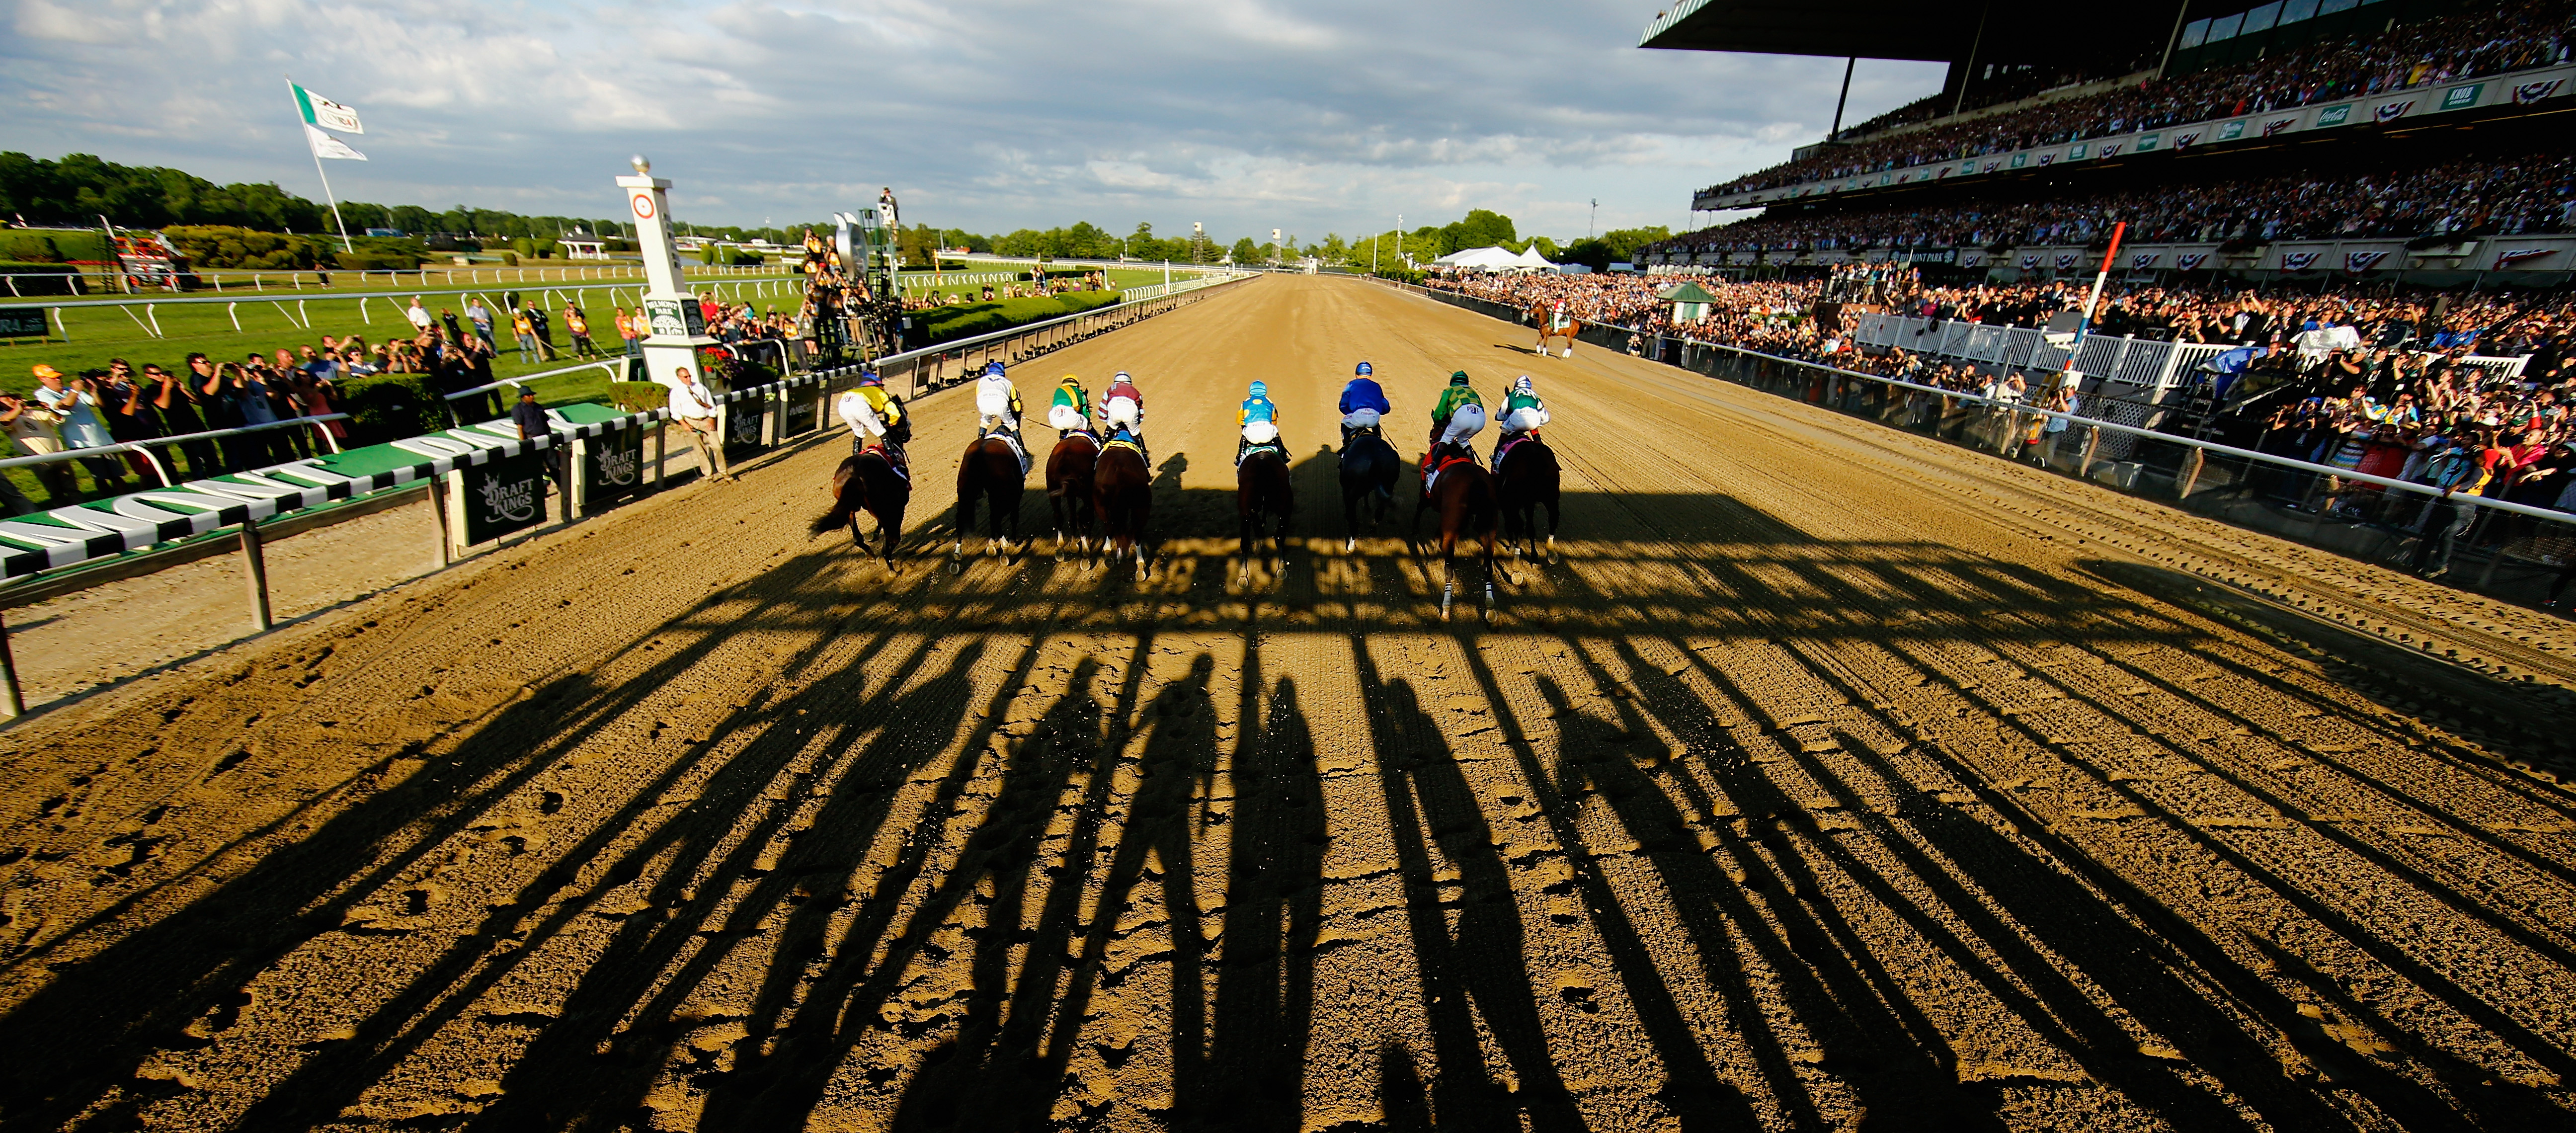 The field leaves the starting gate at the beginning of the 147th running of the Belmont Stakes at Belmont Park on June 6, 2015 in Elmont, New York.